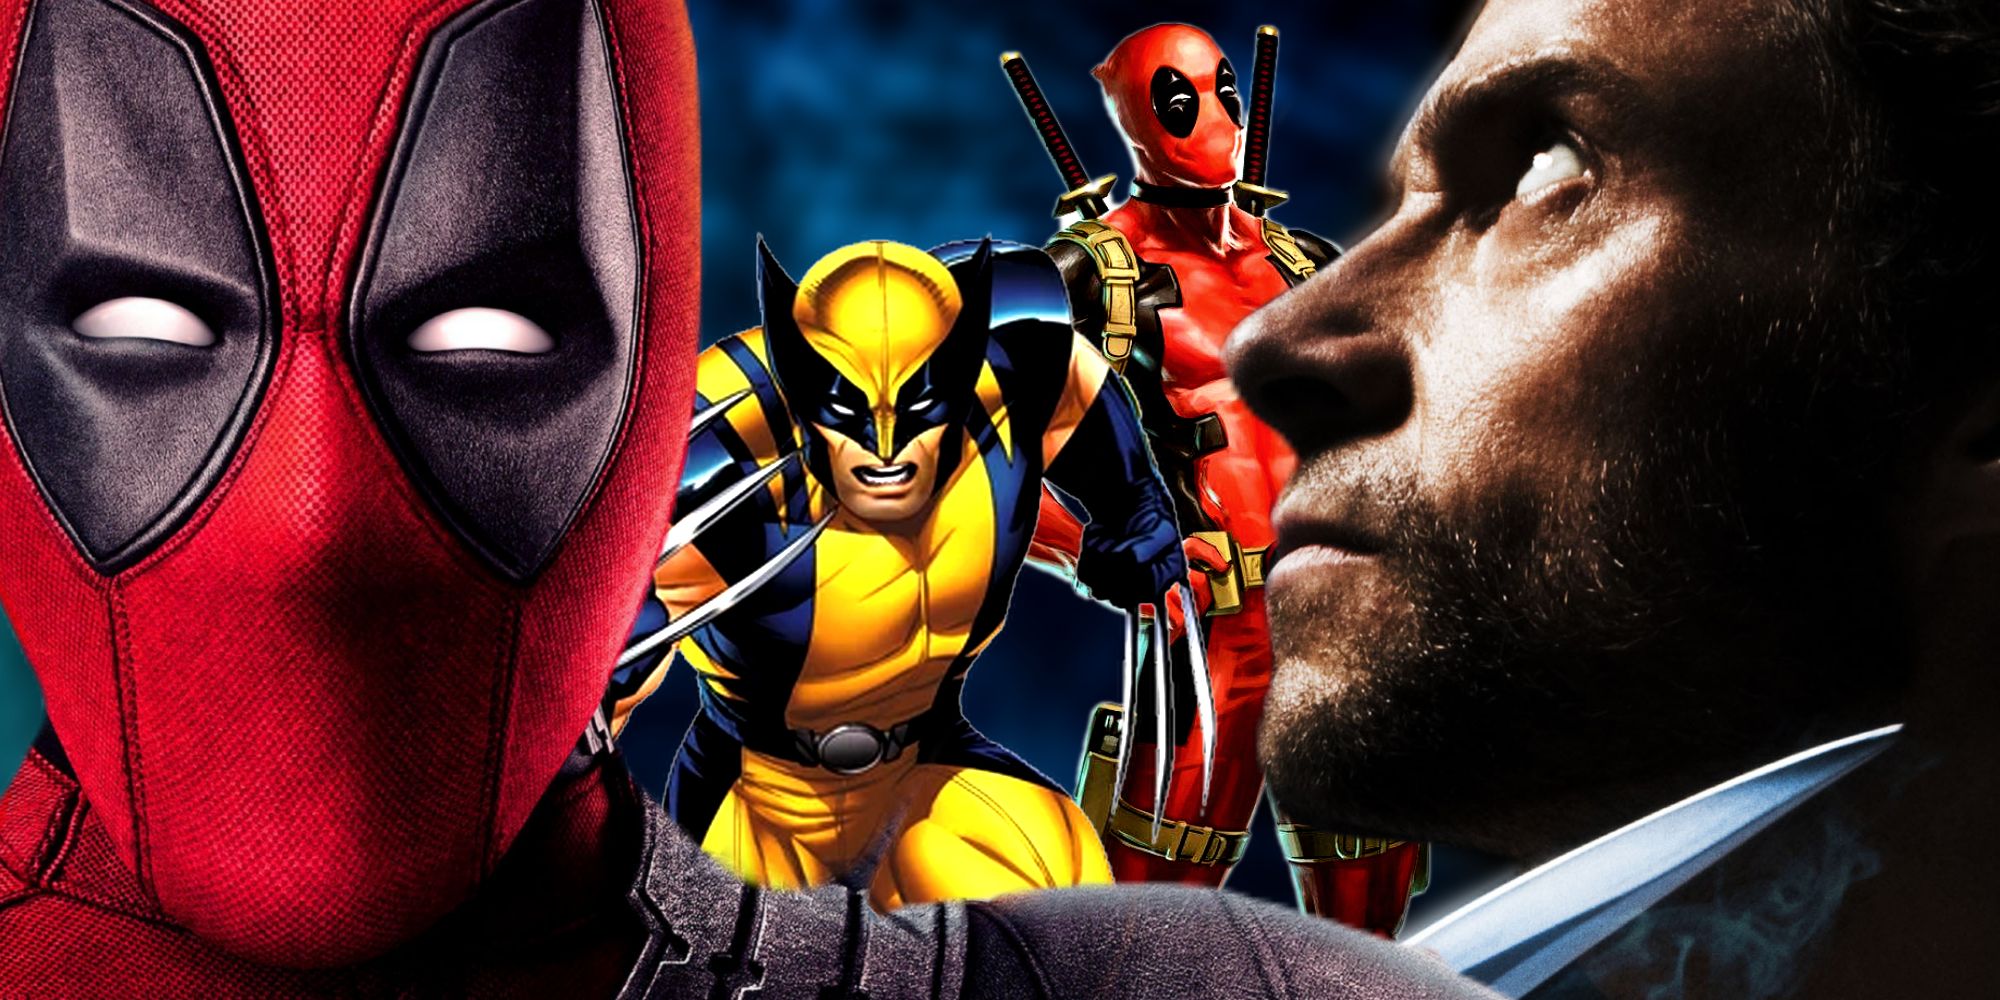 Wolverine and Deadpool in the X-Men Movies and Marvel Comics